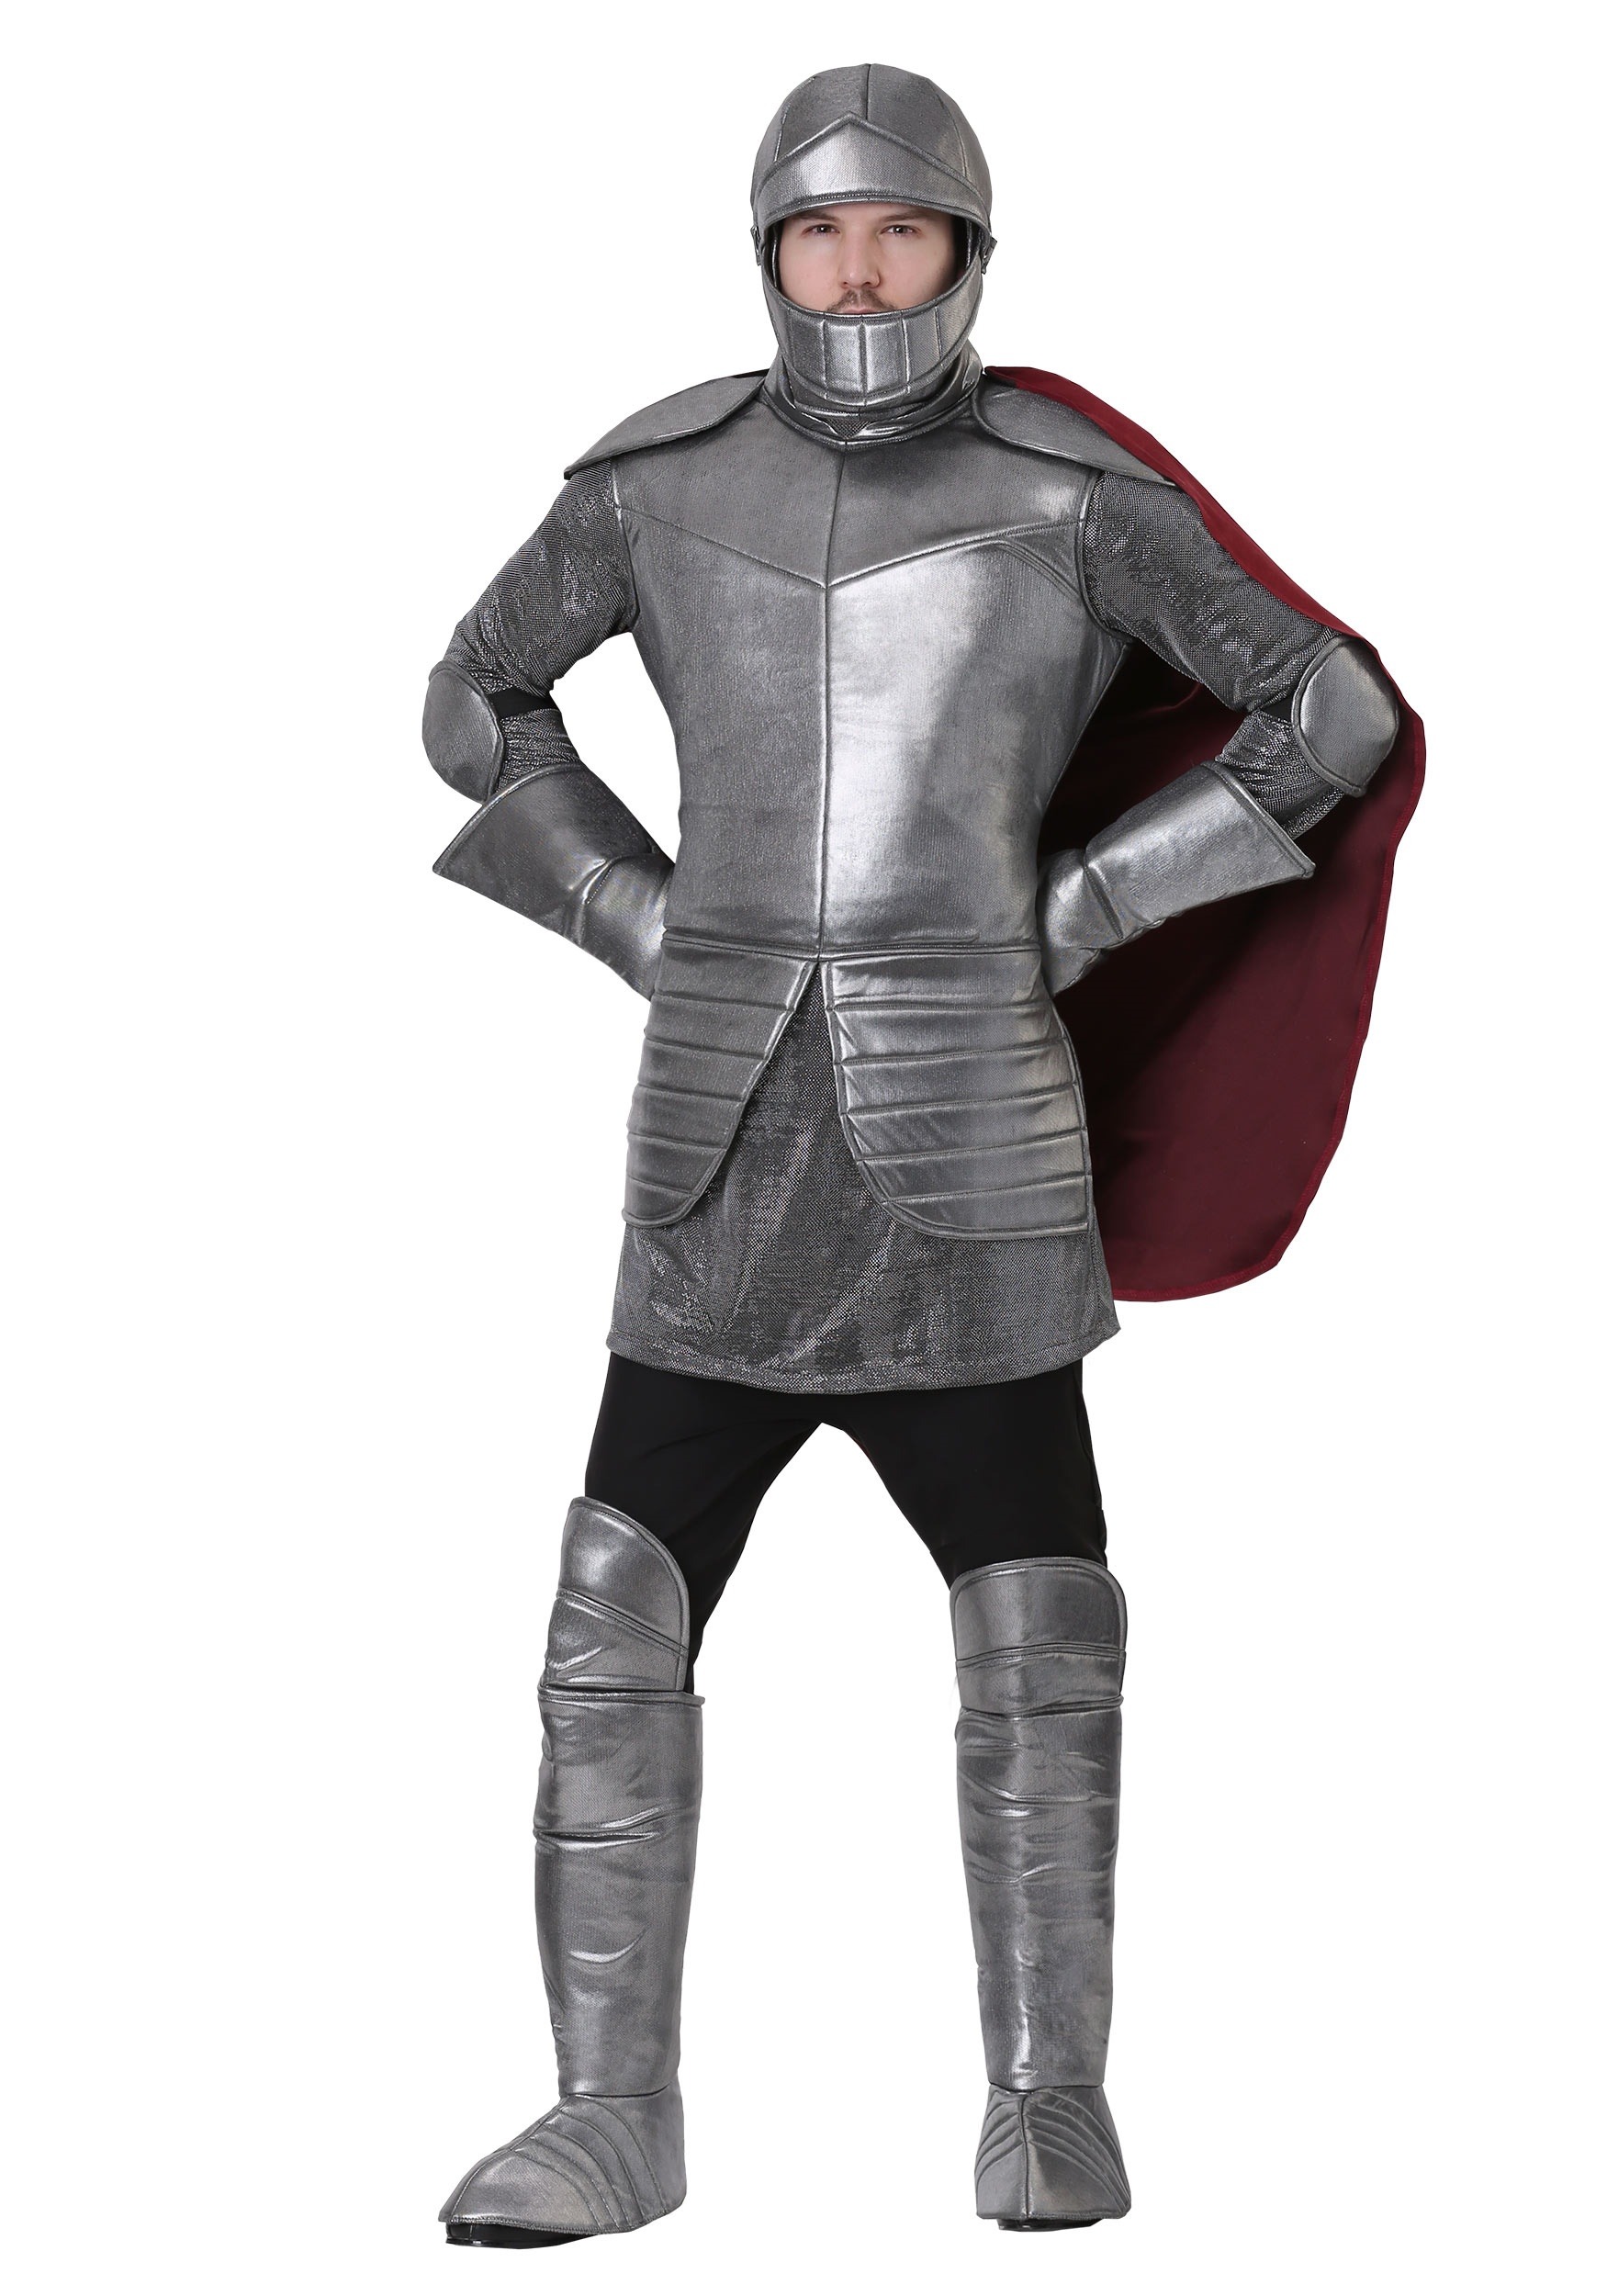 Photos - Fancy Dress ROYAL FUN Costumes Men's  Medieval Knight Costume Gray/Red FUN6142AD 